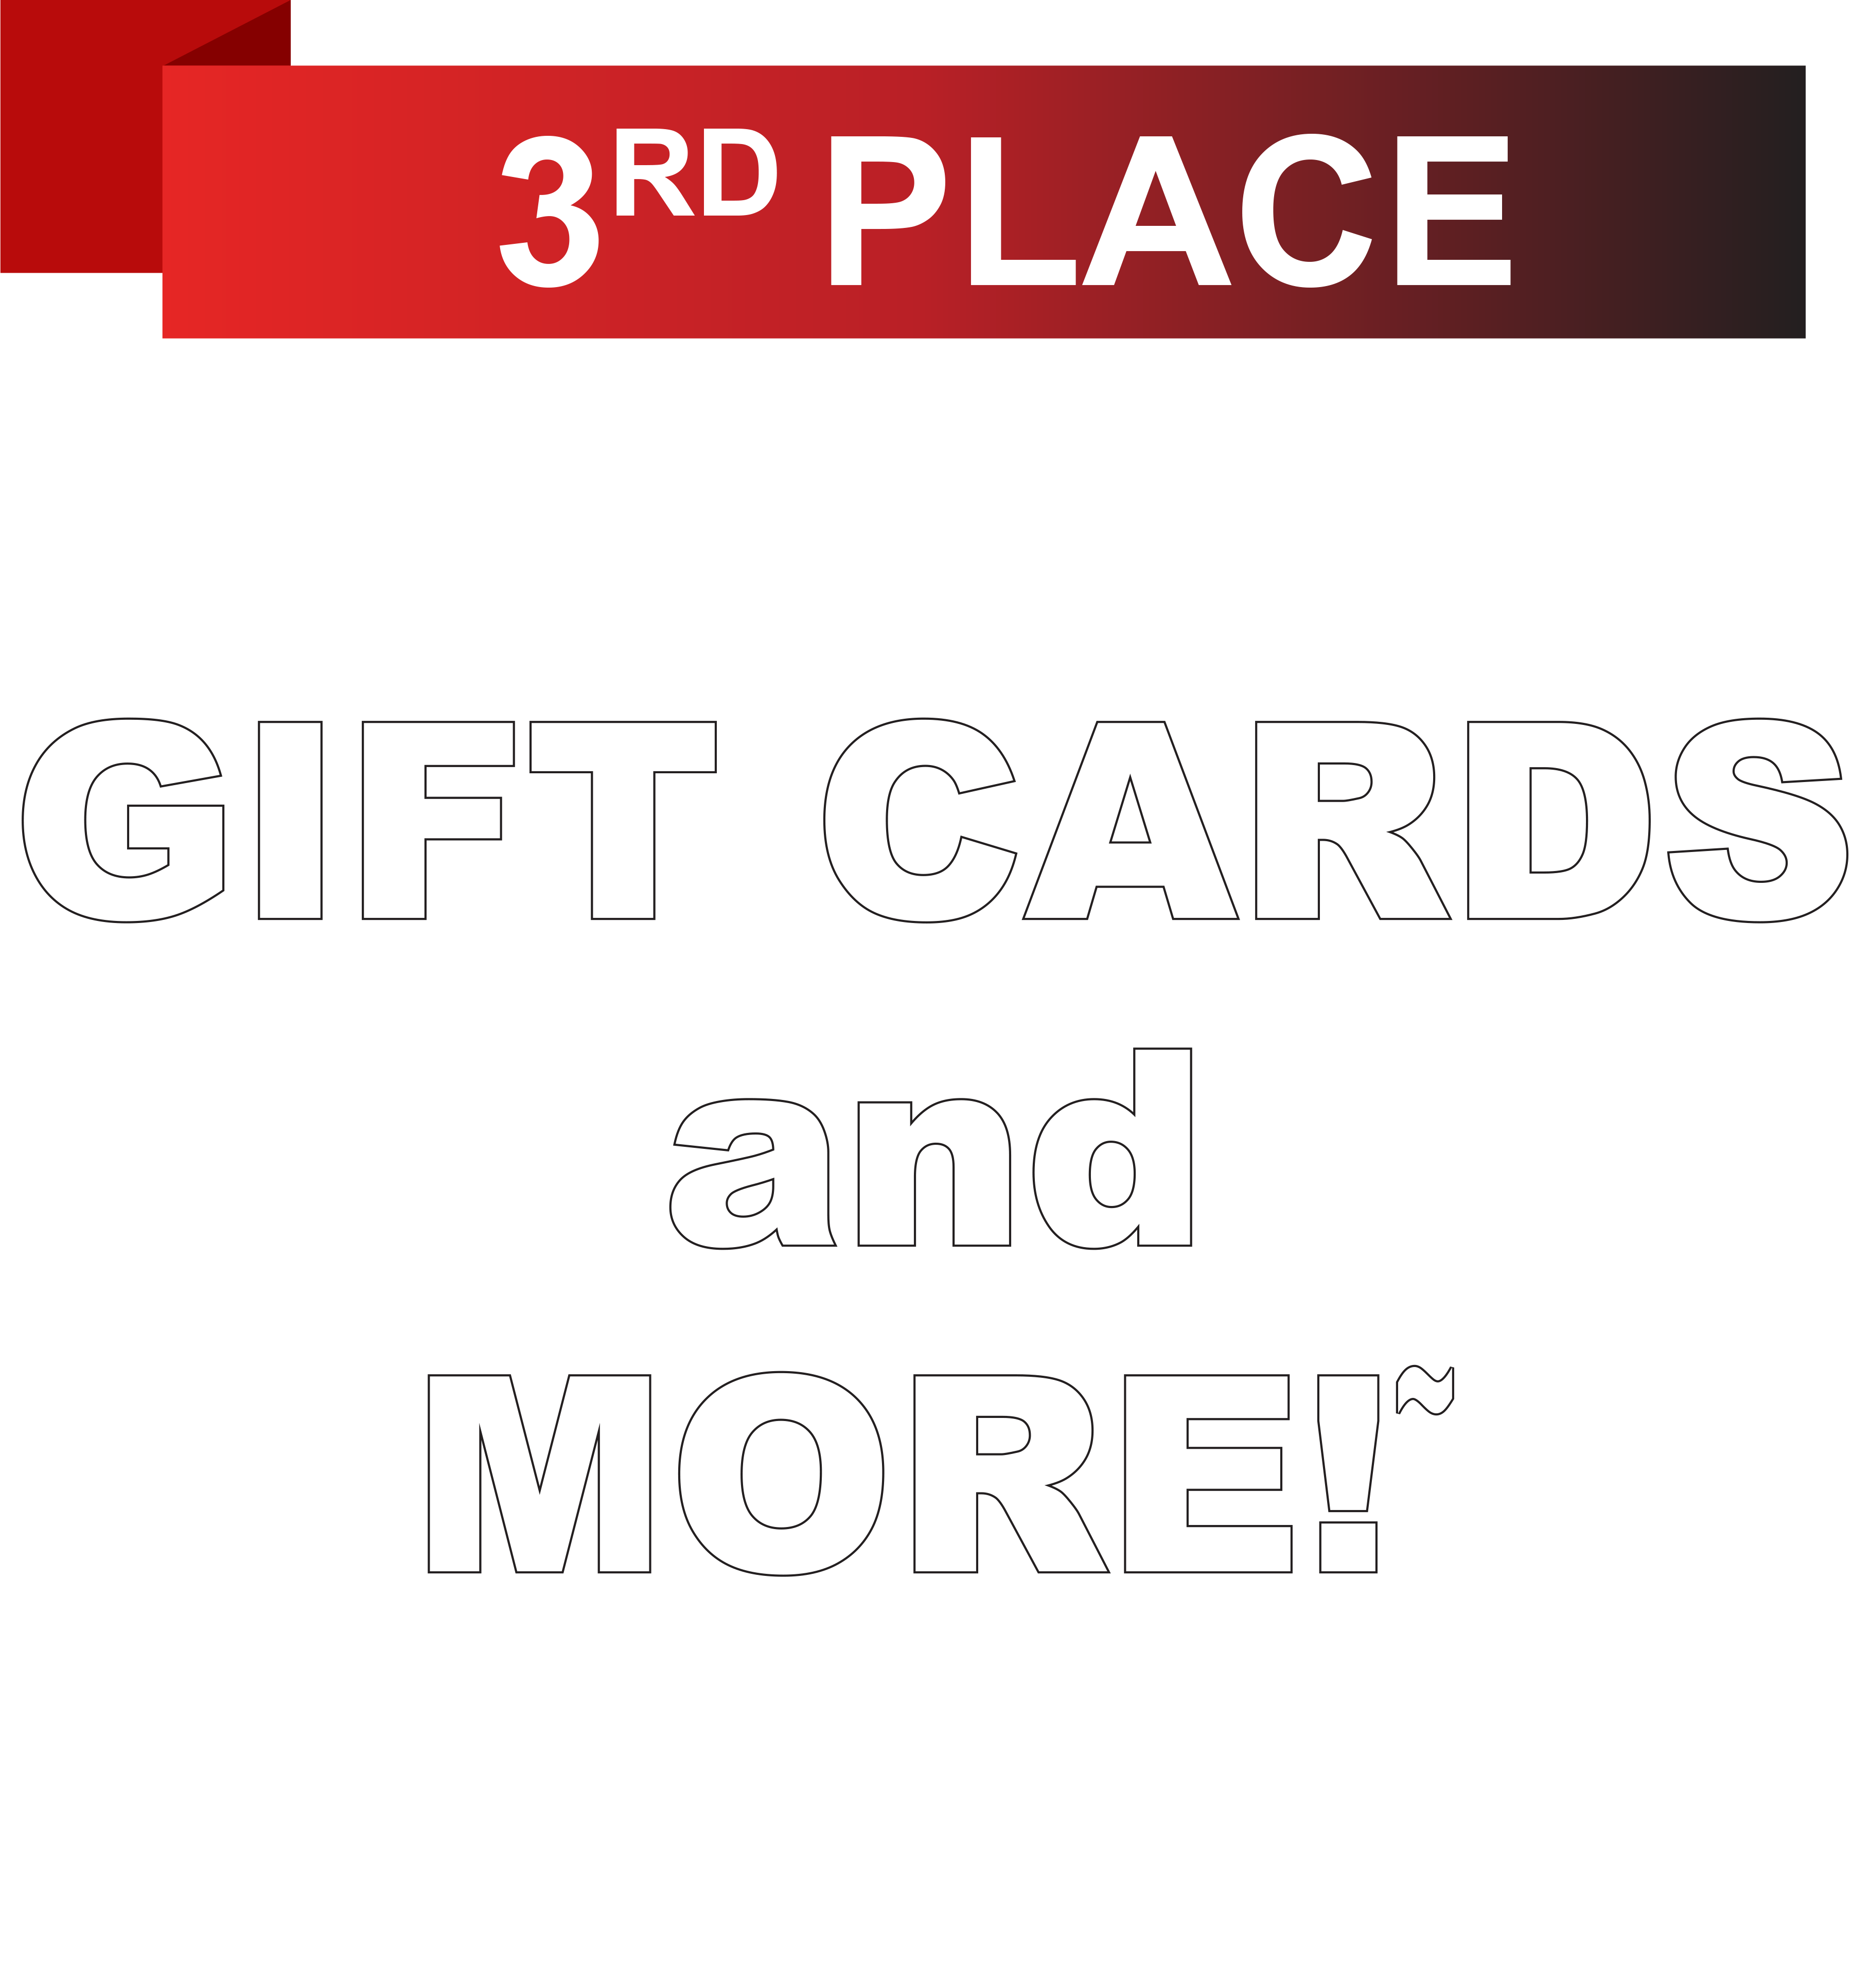 Gift cards and more!